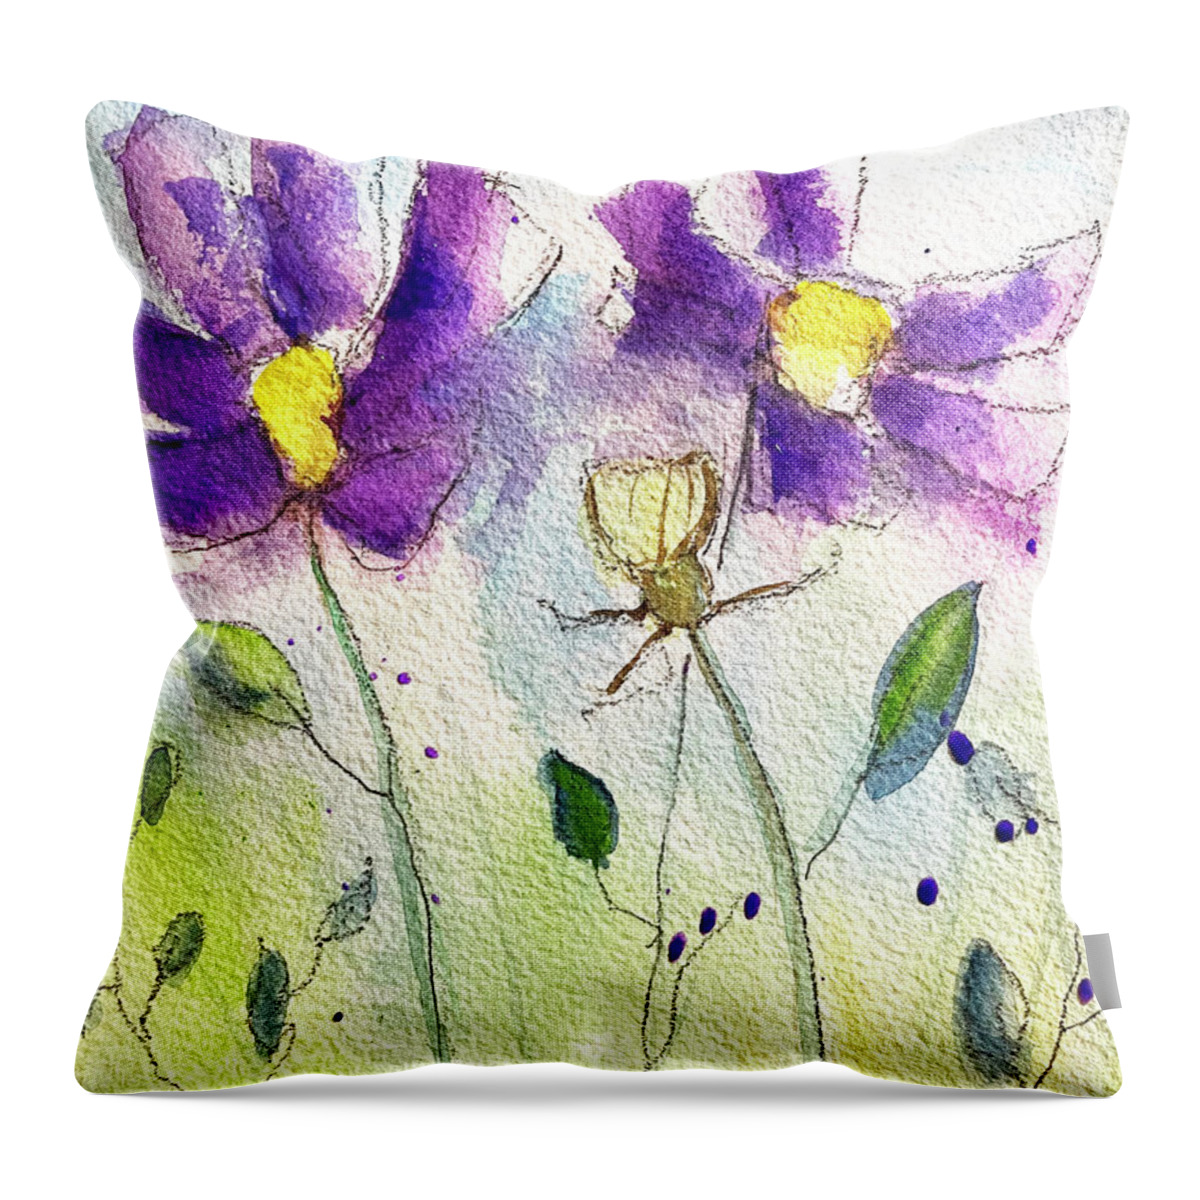 Cosmos Throw Pillow featuring the painting Purple Cosmos by Roxy Rich